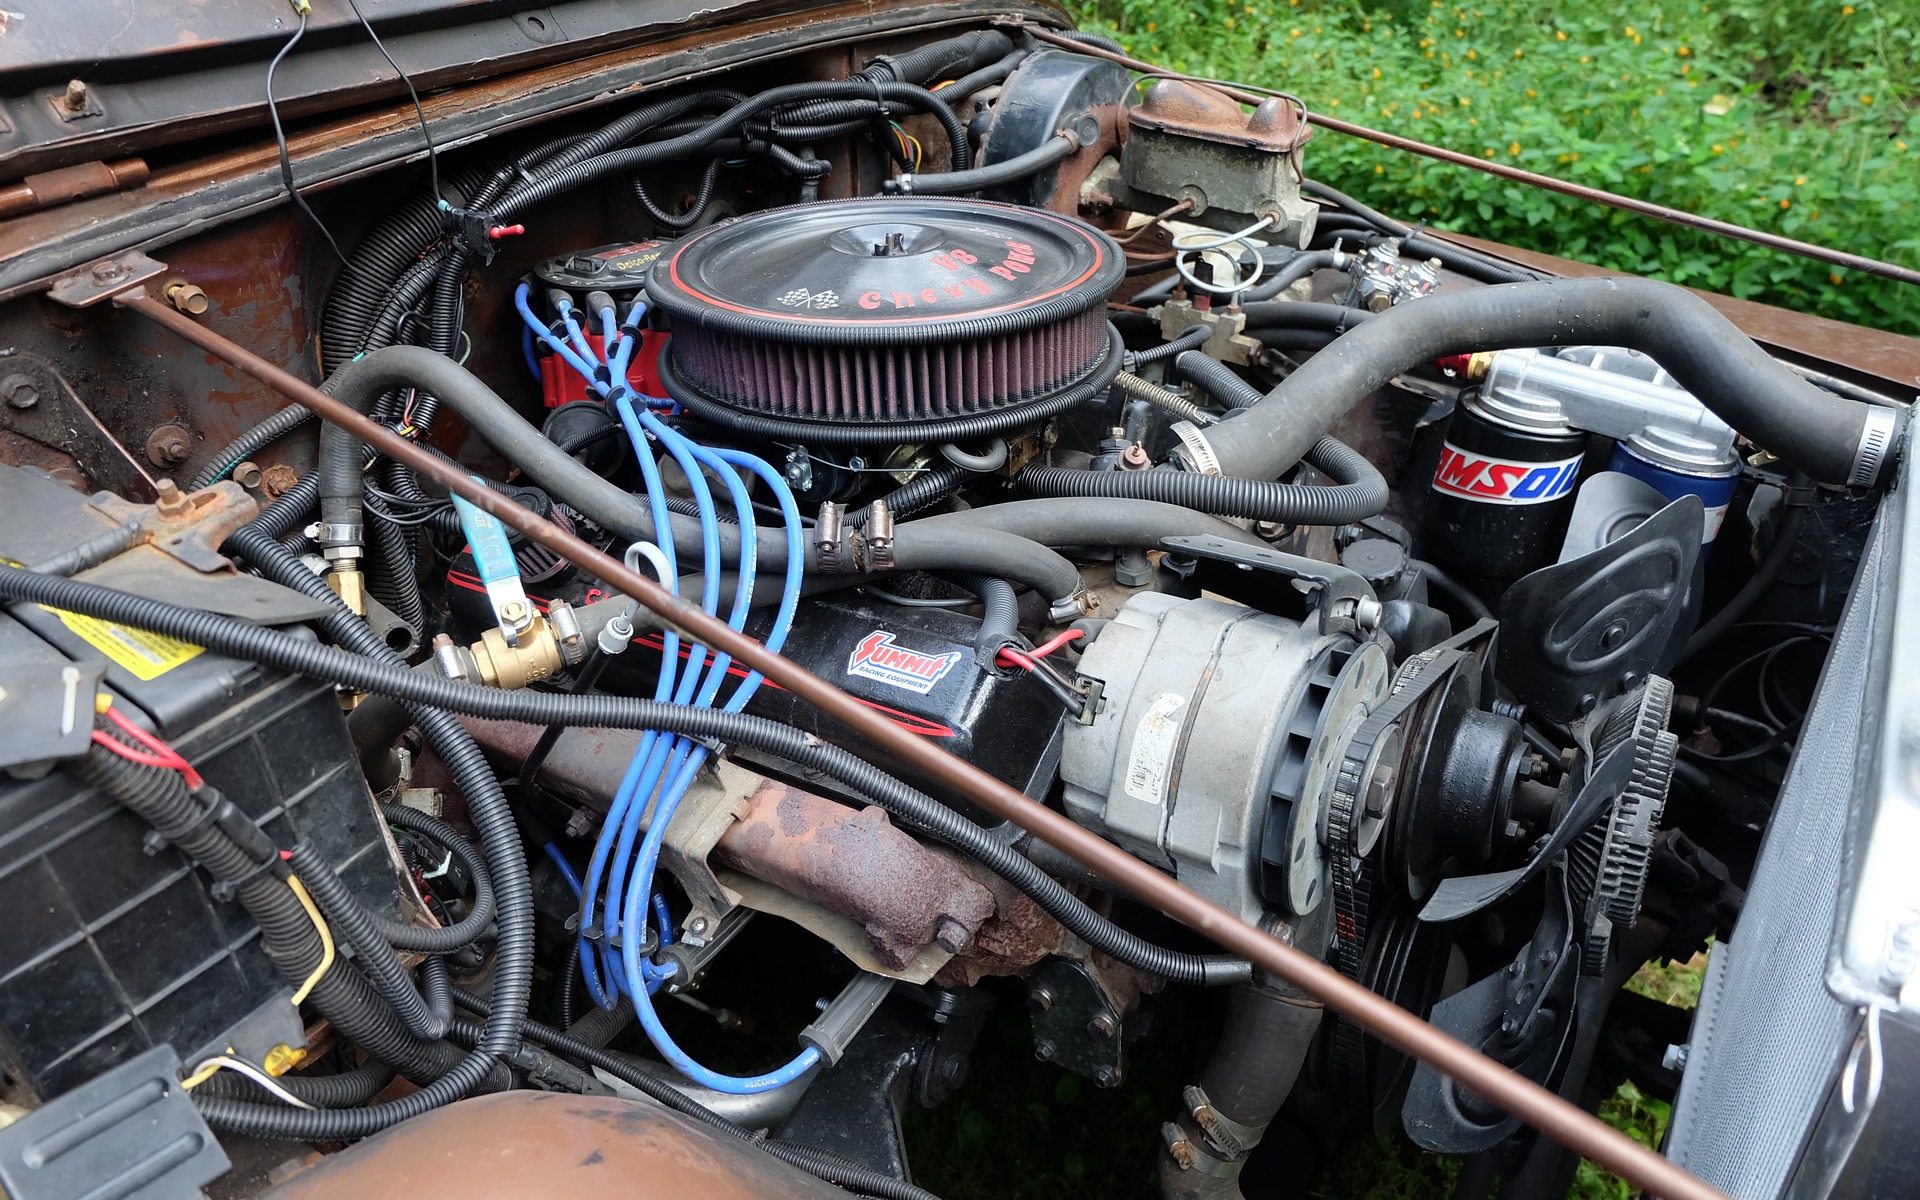 This engine was once used to burn rubber in a 1984 Pontiac Trans Am.